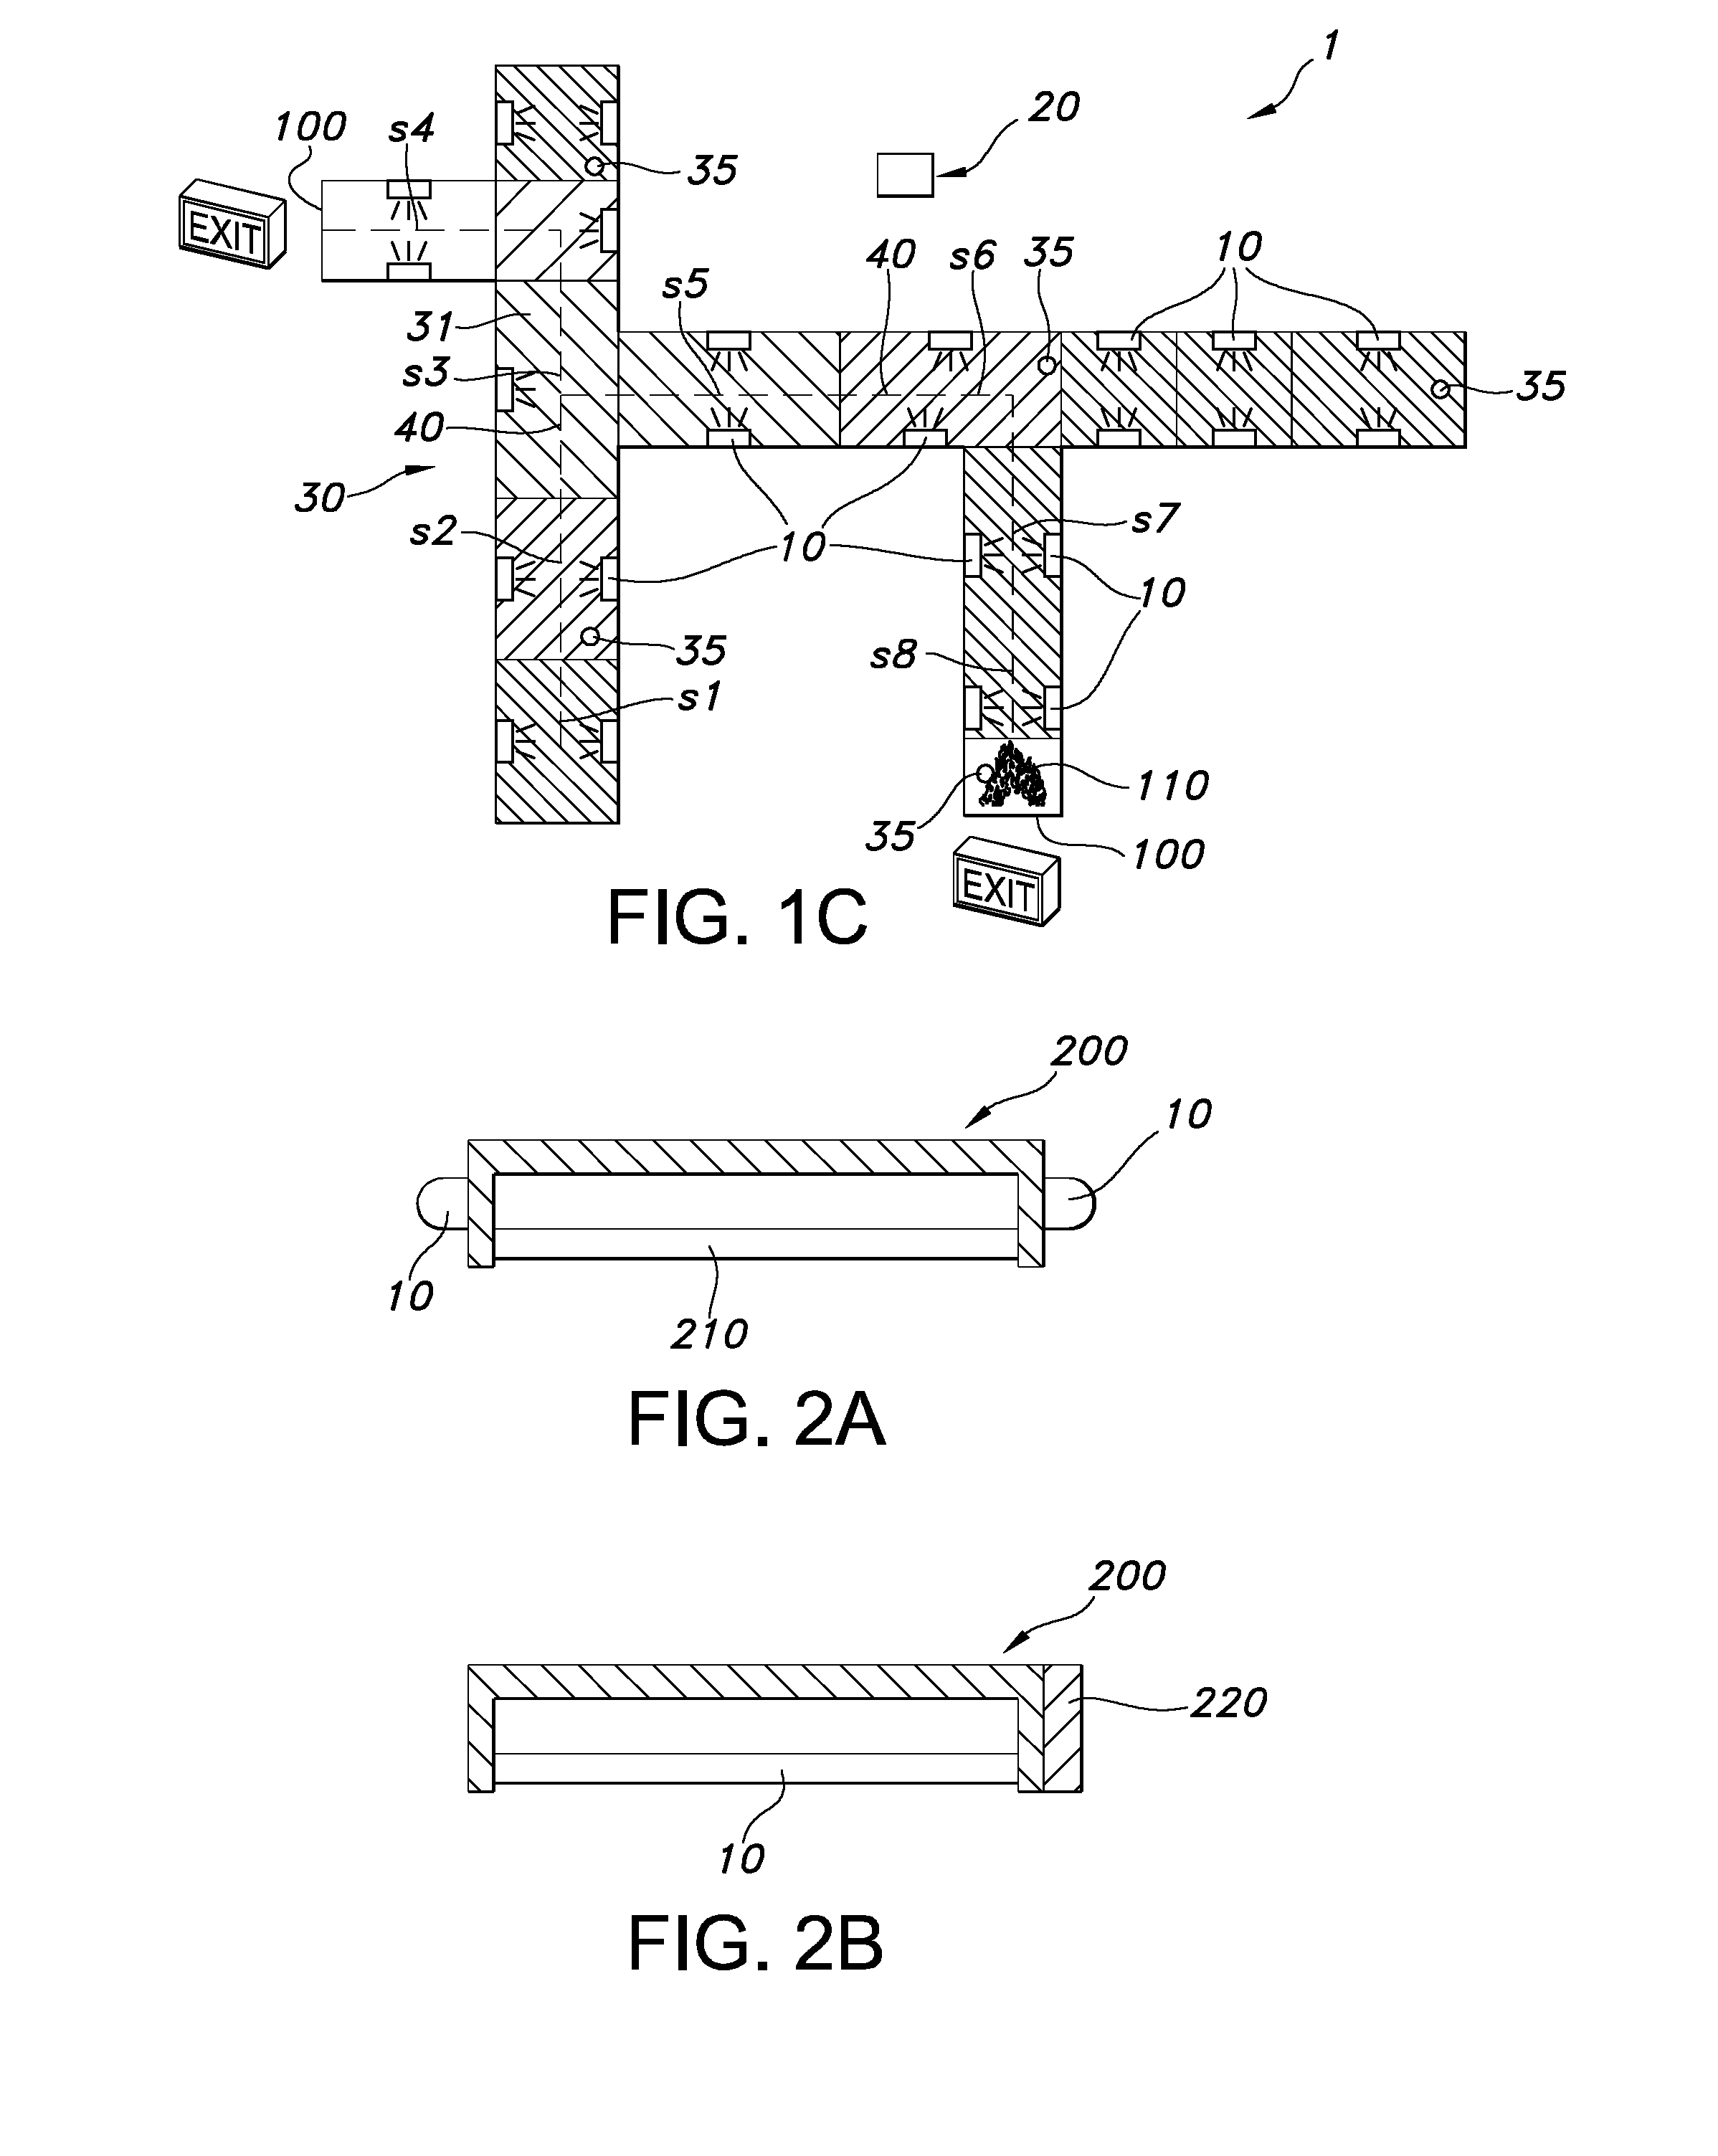 Method for guiding a human to a reference location, and lighting system comprising a plurality of light sources for use in such method